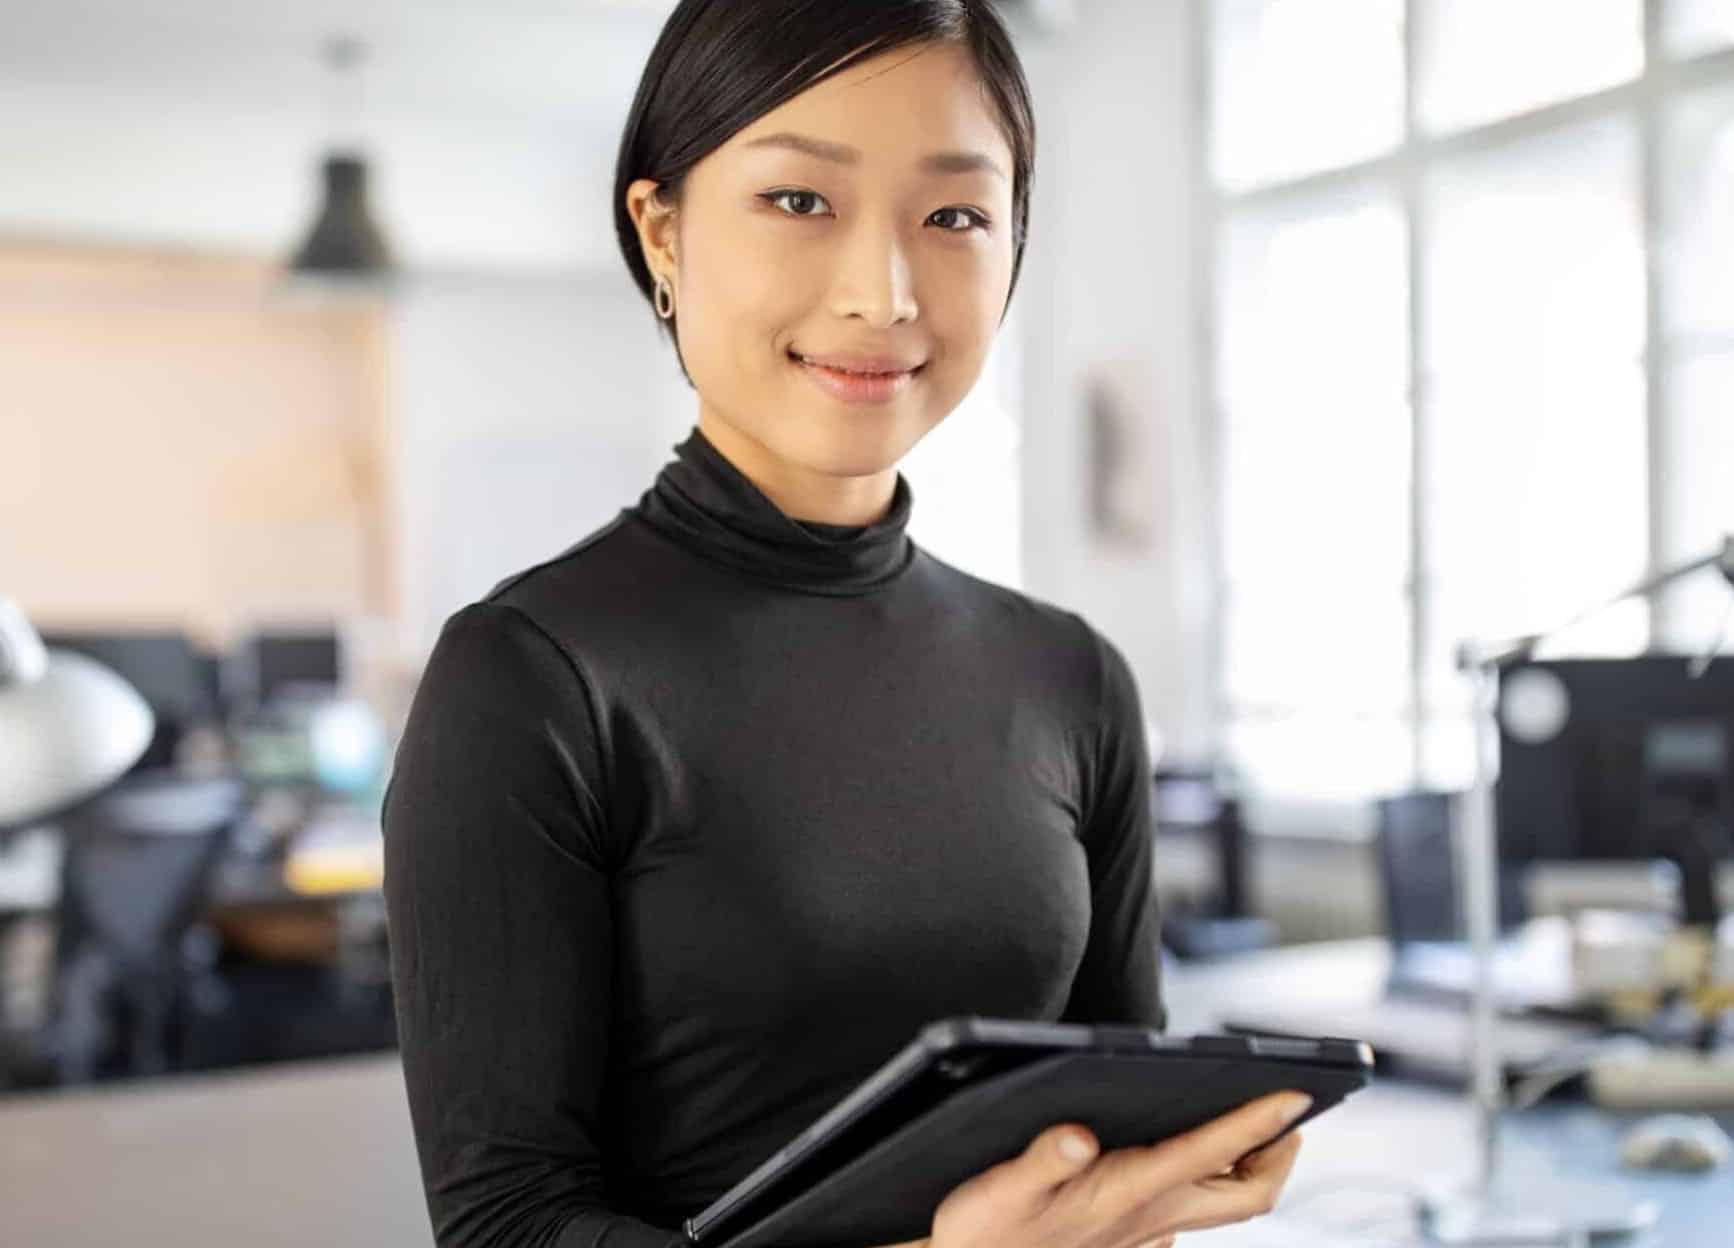 Asian woman on IT services team supporting collaboration technology management